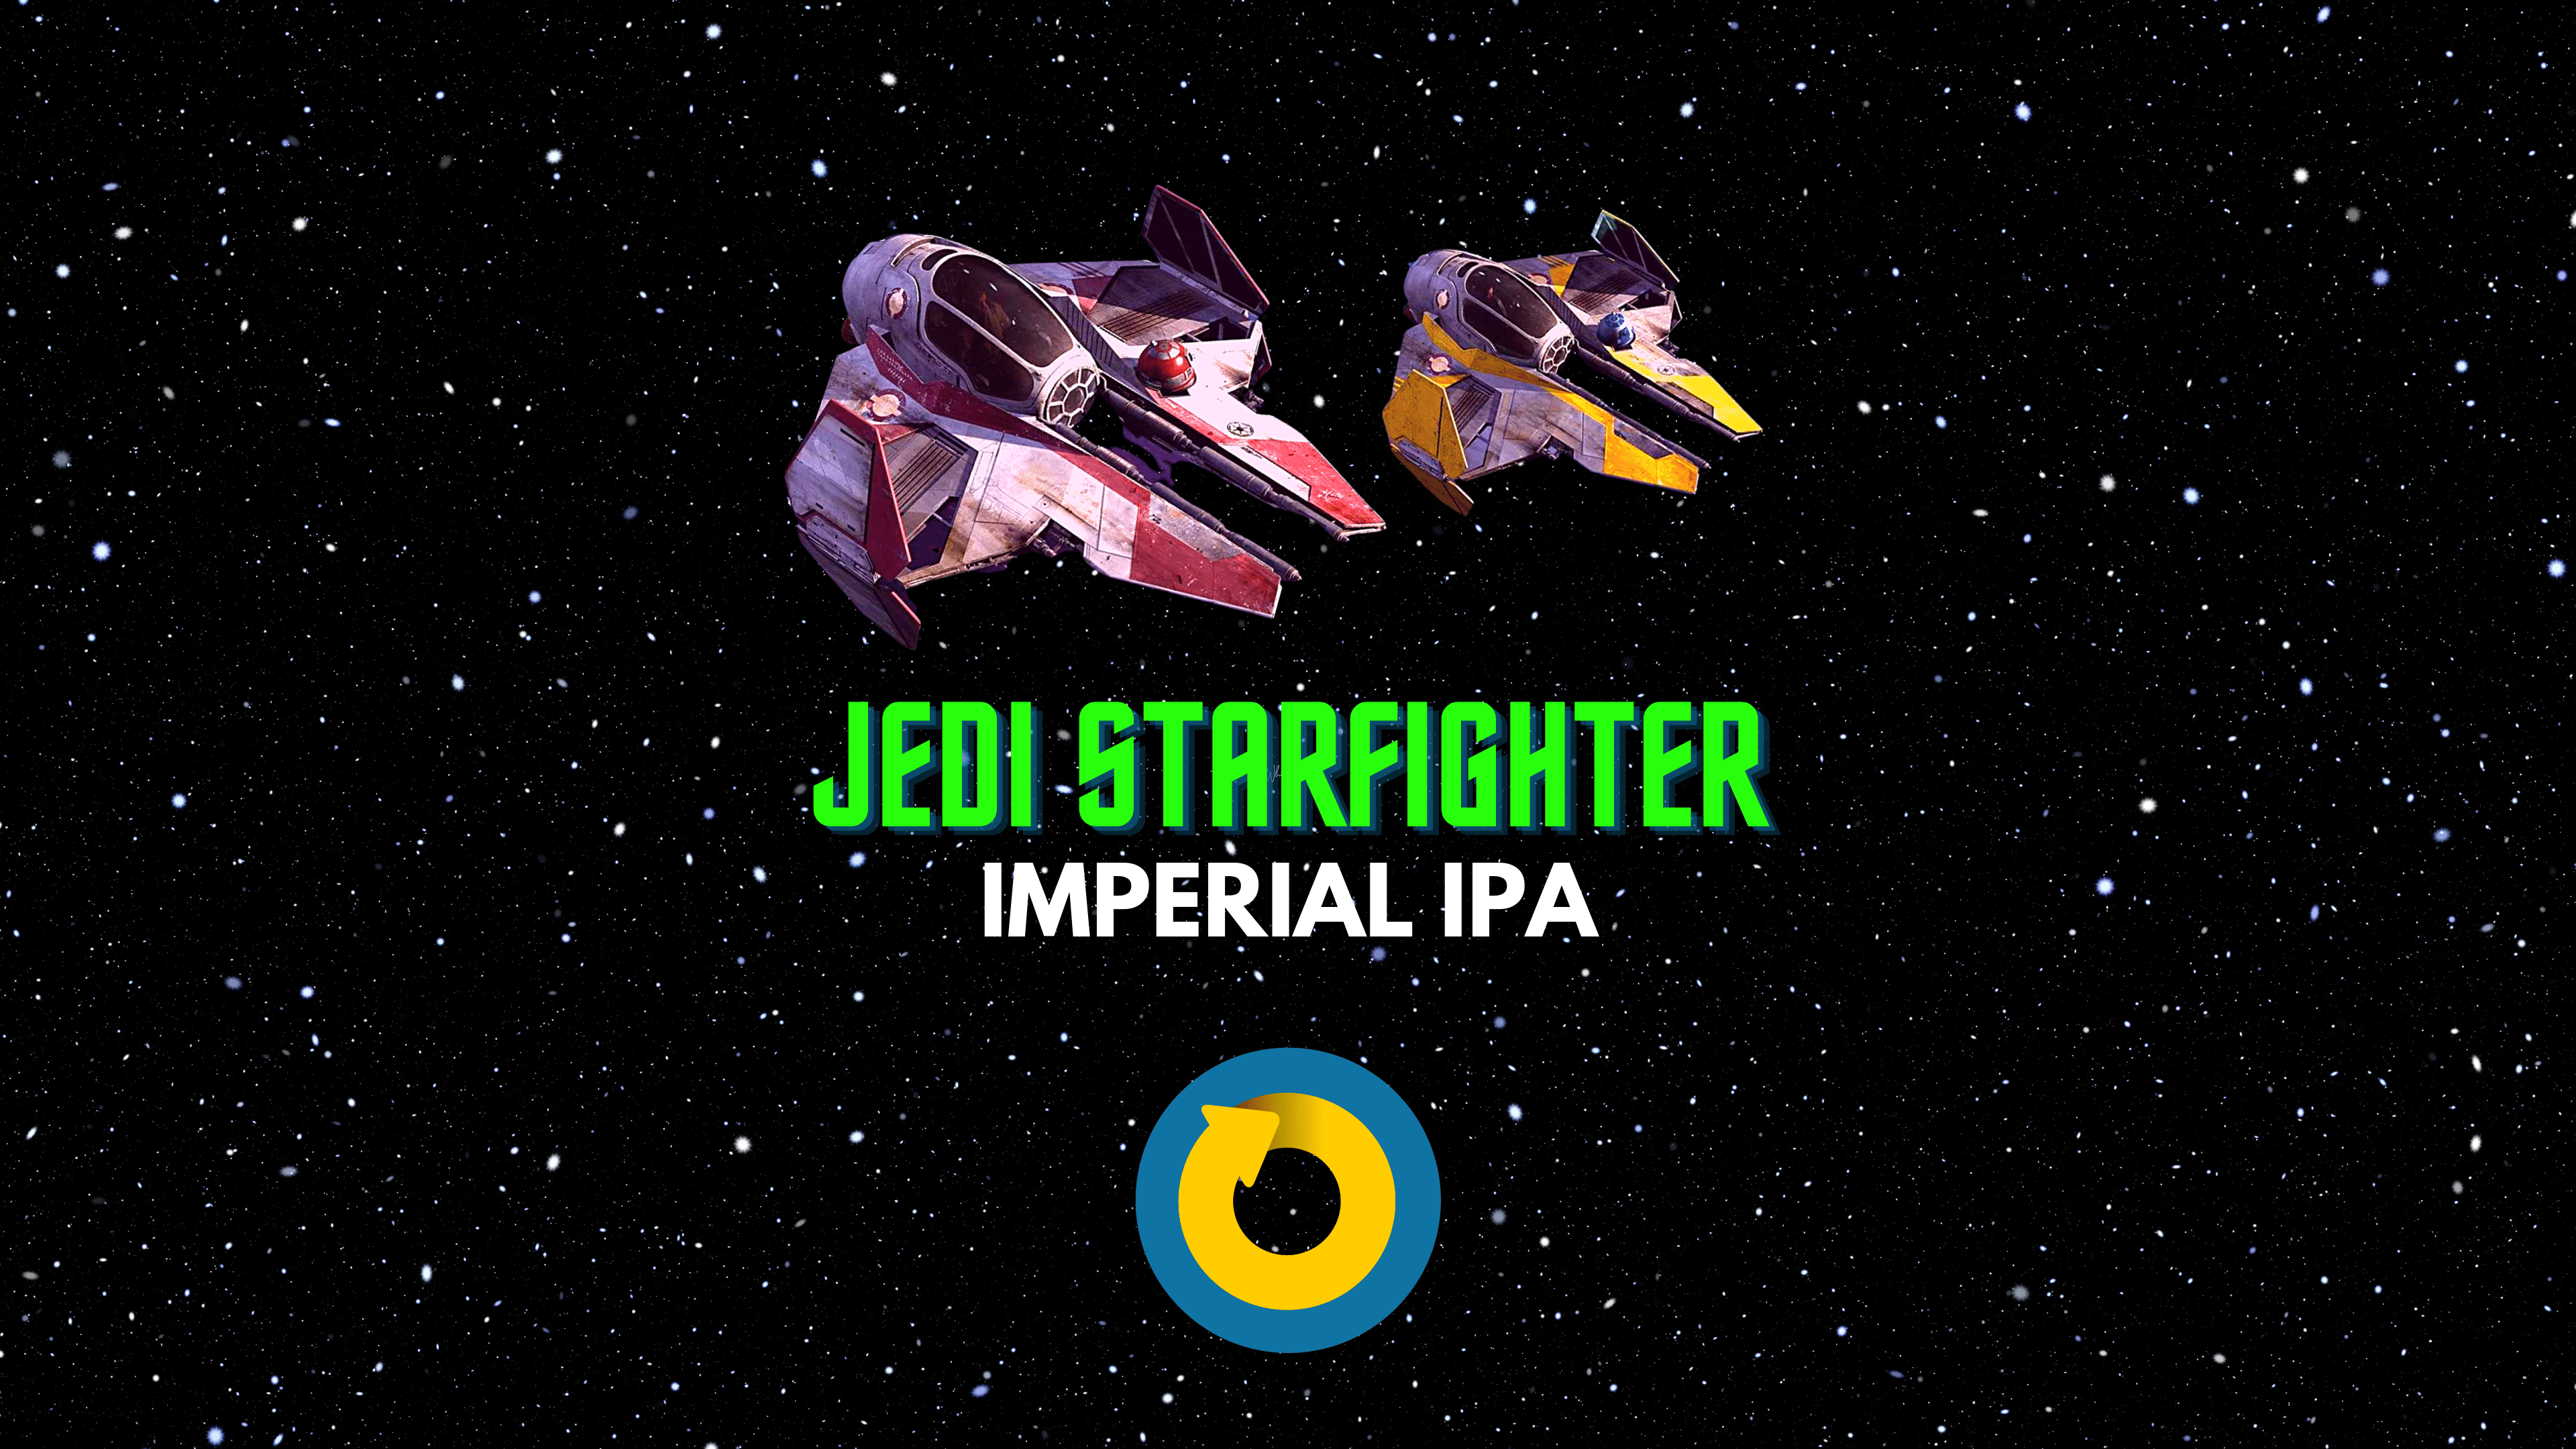 Jedi Starfighter Imperial IPA Release at On Rotation